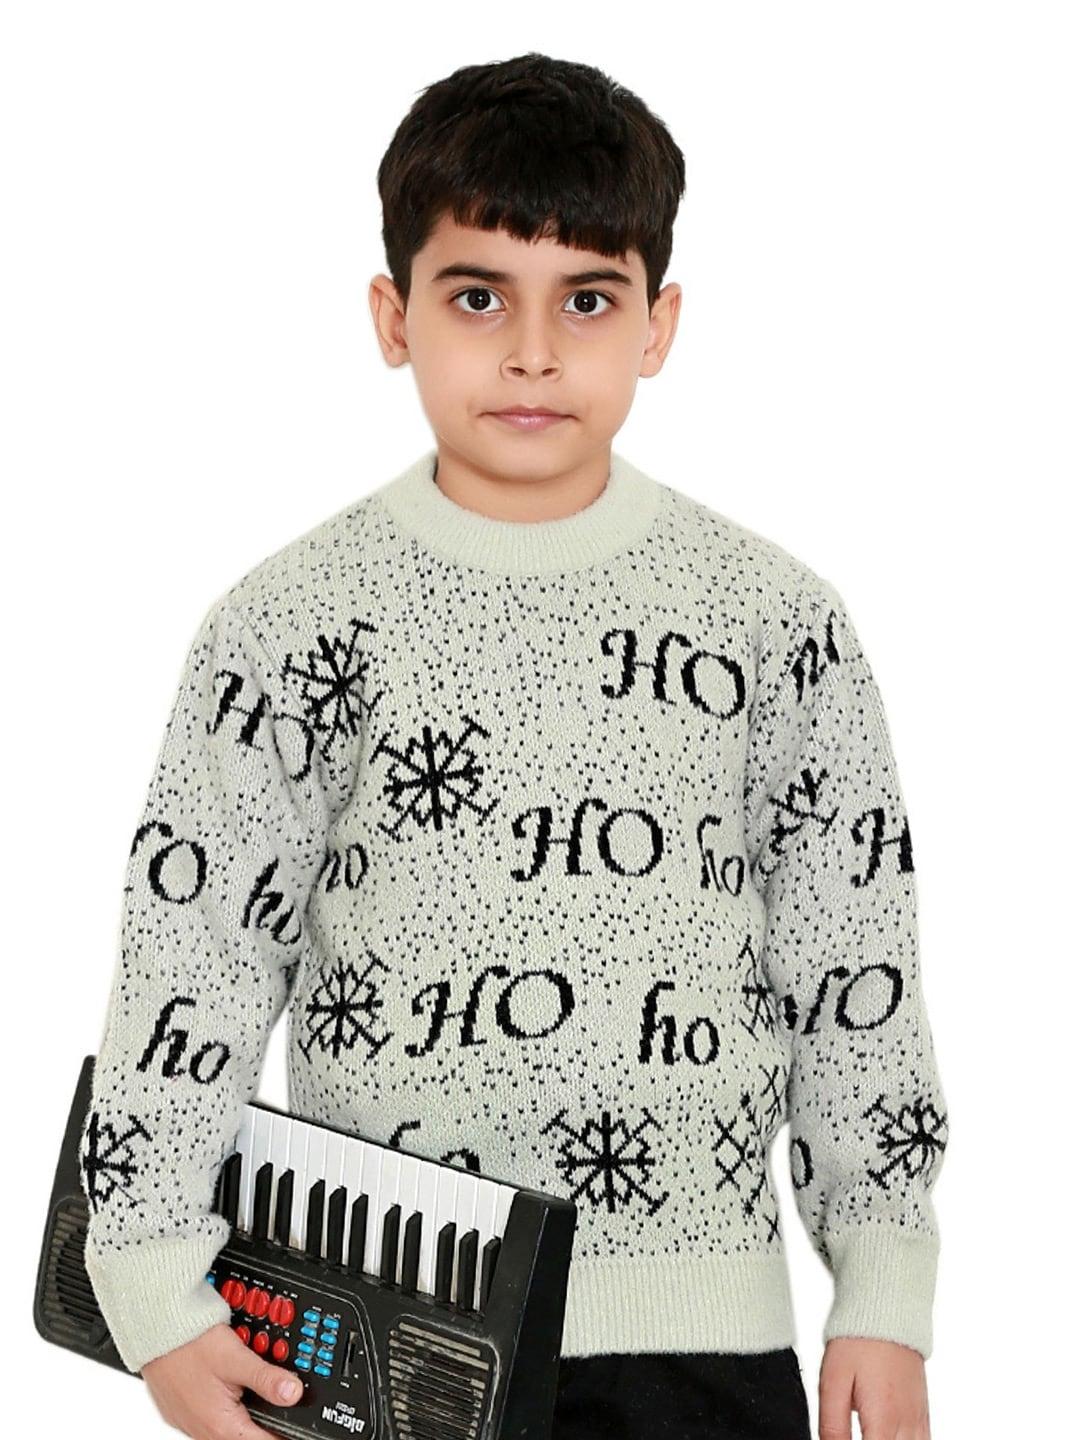 baesd-boys-typography-printed-ribbed-round-neck-full-sleeves-acrylic-sweater-vest